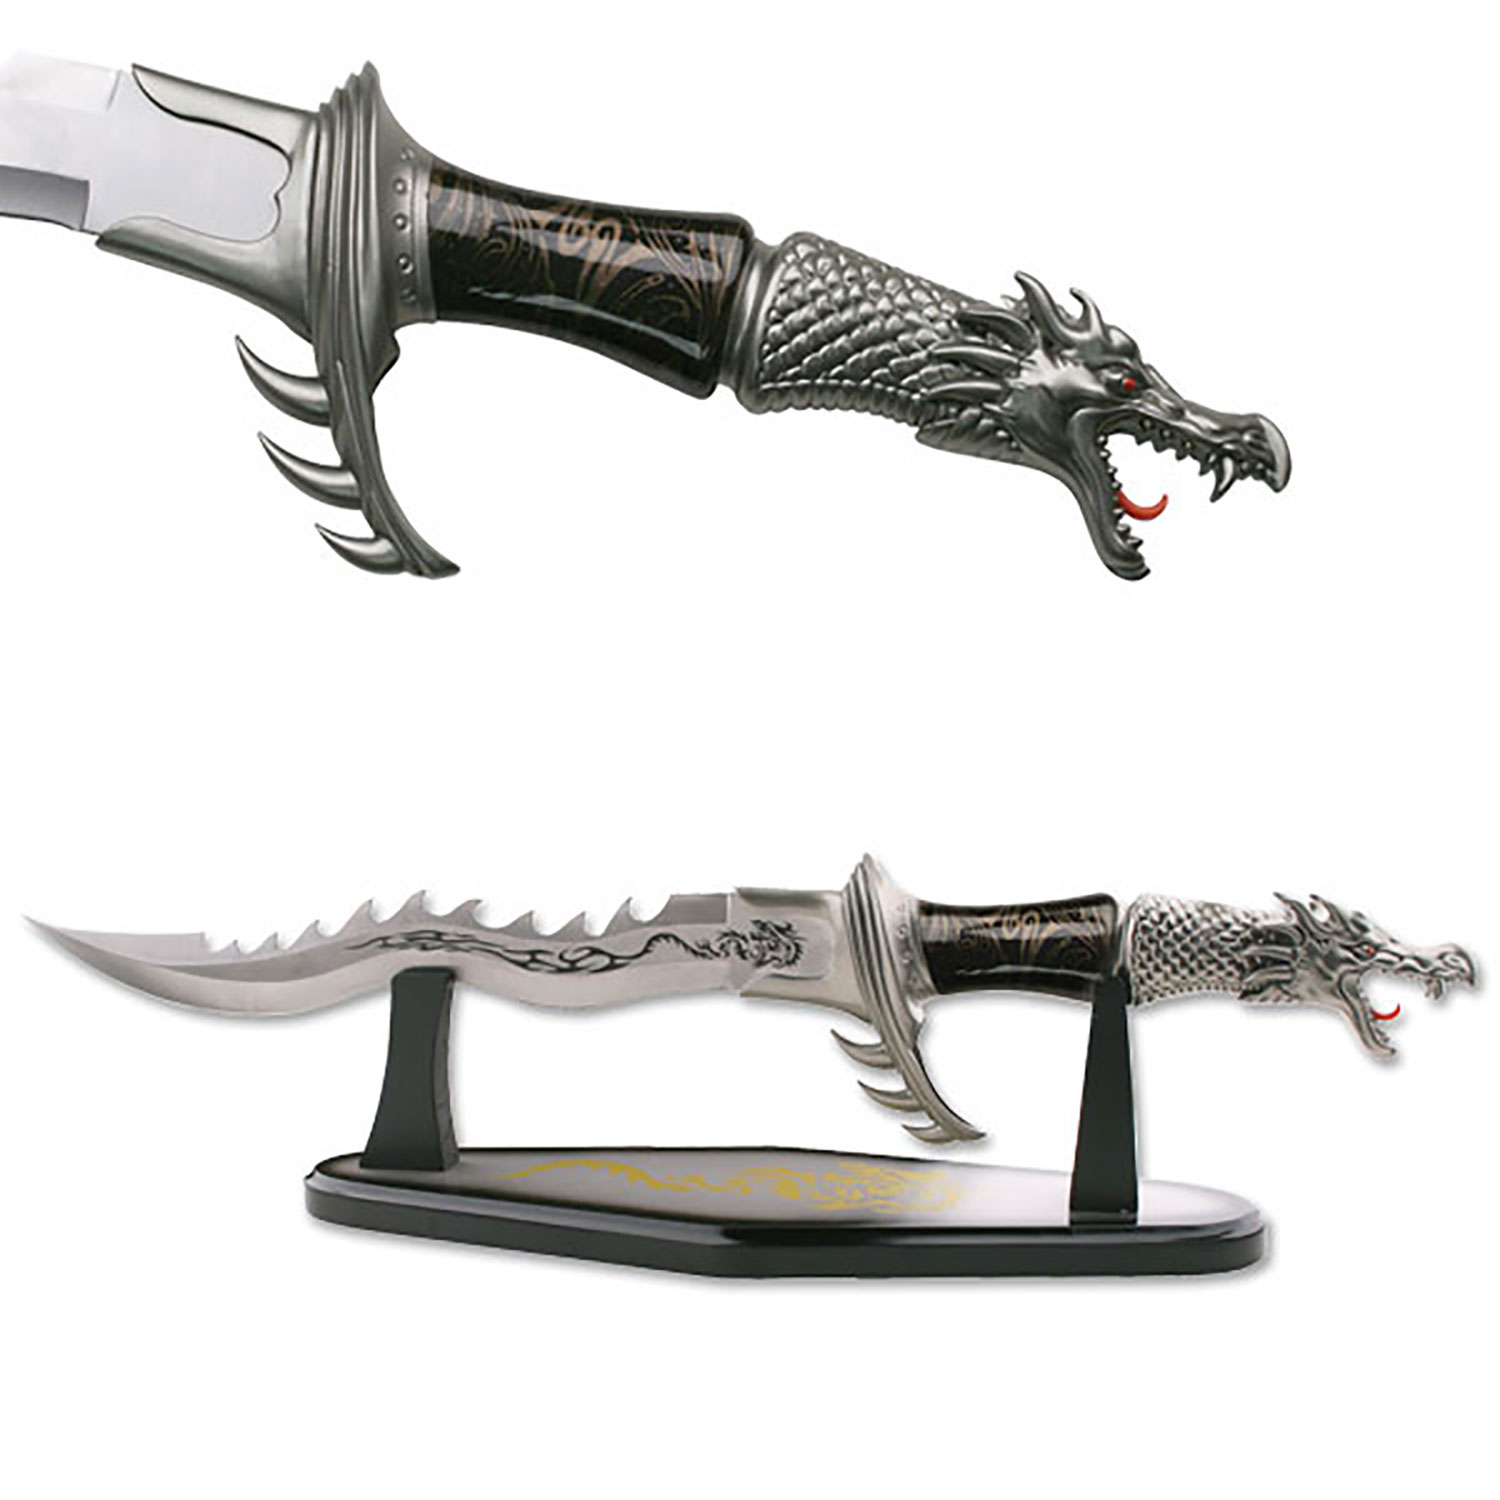 Fantasy Kris Dragon Dagger Knife with Display Stand-5C2-SI20